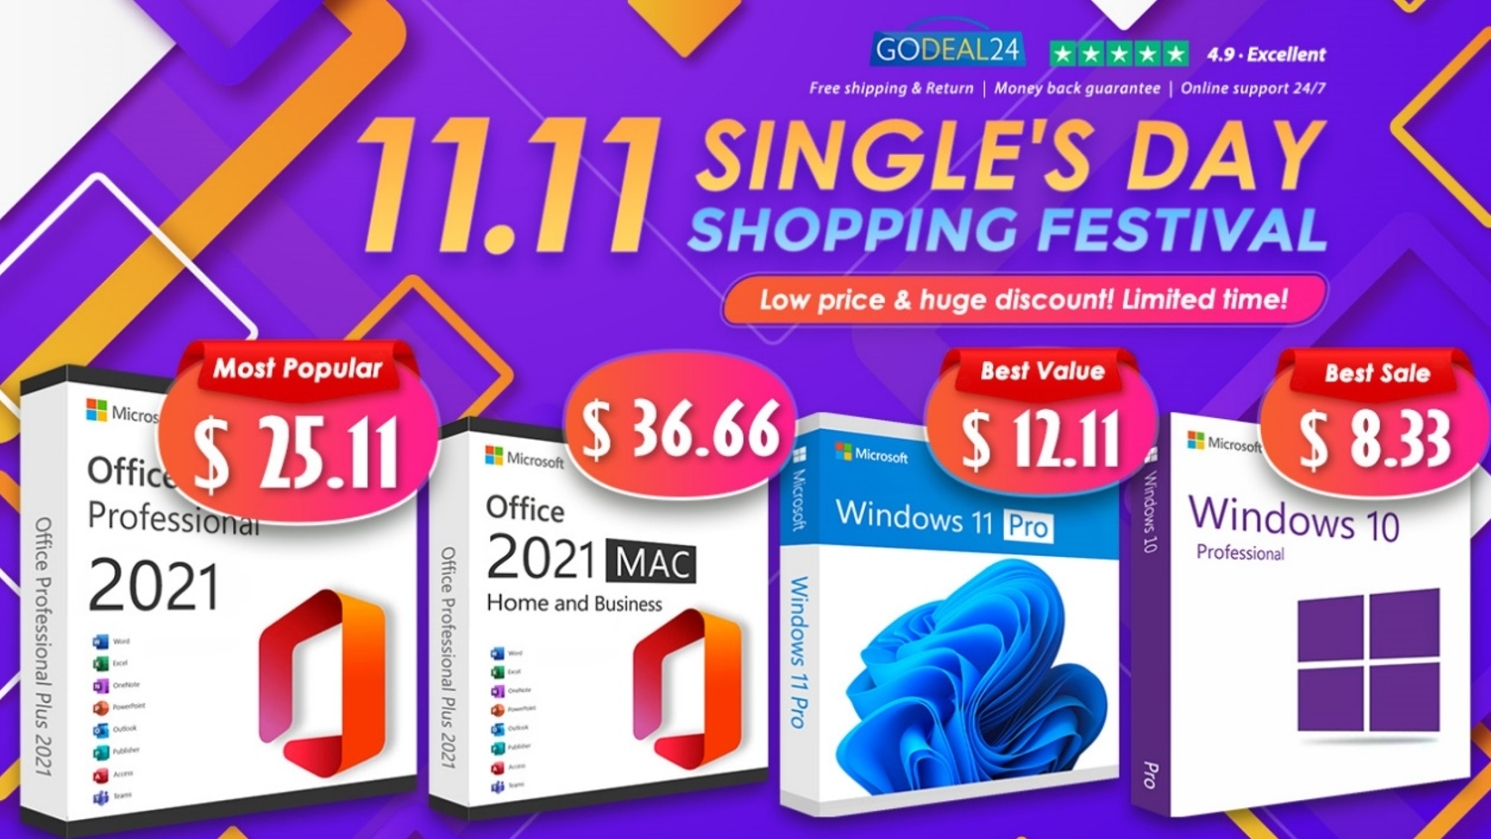 https://static.tweaktown.com/news/16x9/94199_dive-into-godeal24-double-11-sale-with-limited-time-cheap-office-2021-and-windows-10-from-7.jpg